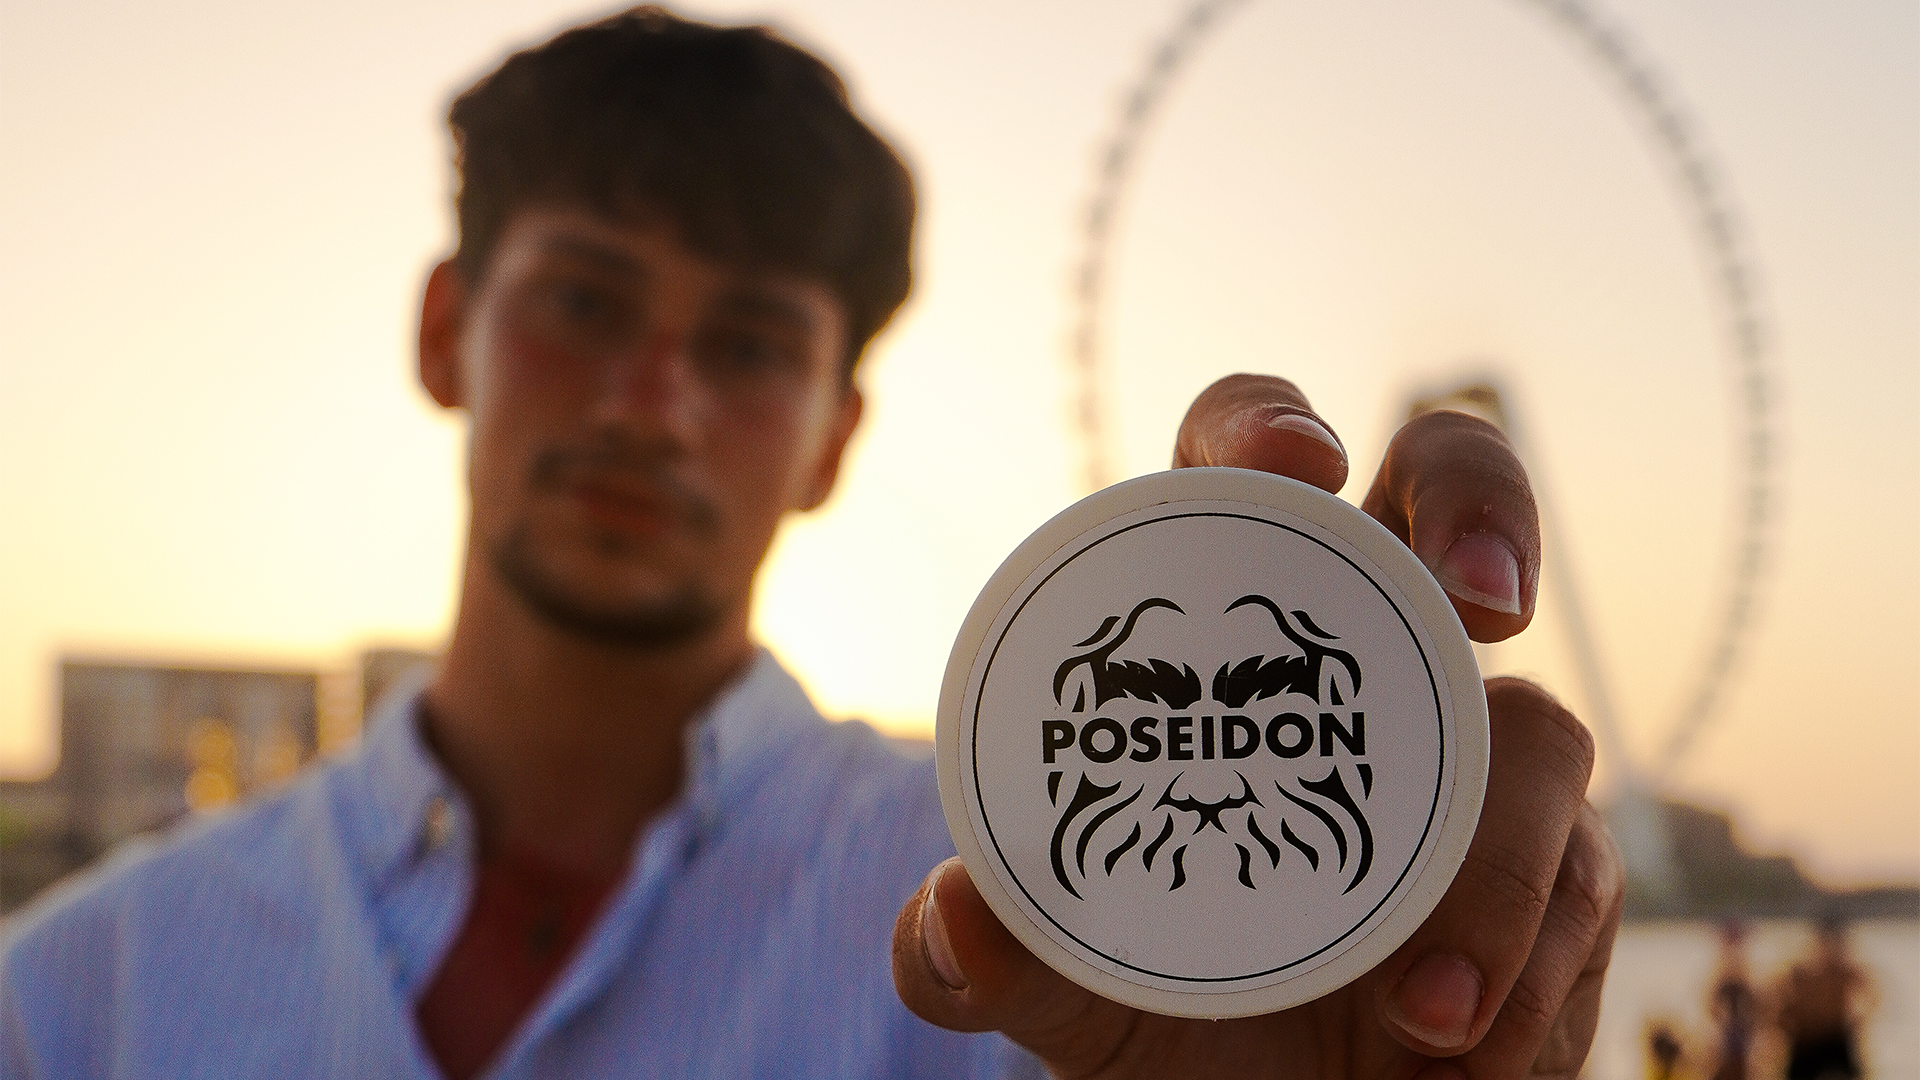 Explore Poseidon's premium haircare and styling products. From Sea Salt Sprays to Grooming Clays, discover natural ingredients for effortless beauty. Elevate your locks with Poseidon's top-rated essentials. Unleash the power of the sea today!